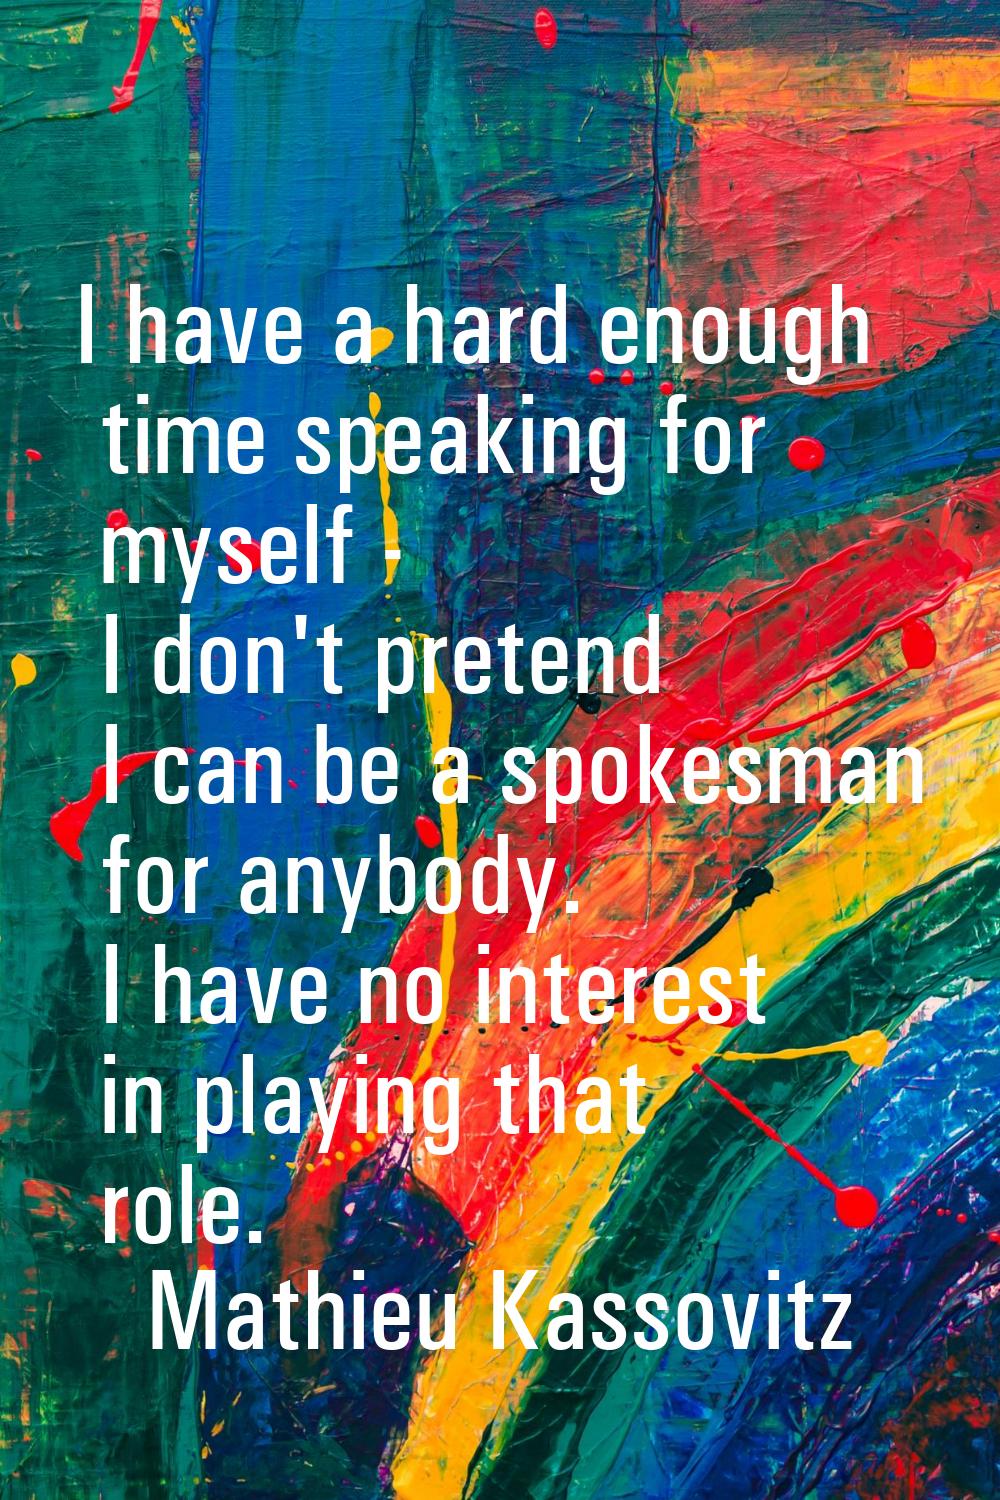 I have a hard enough time speaking for myself - I don't pretend I can be a spokesman for anybody. I